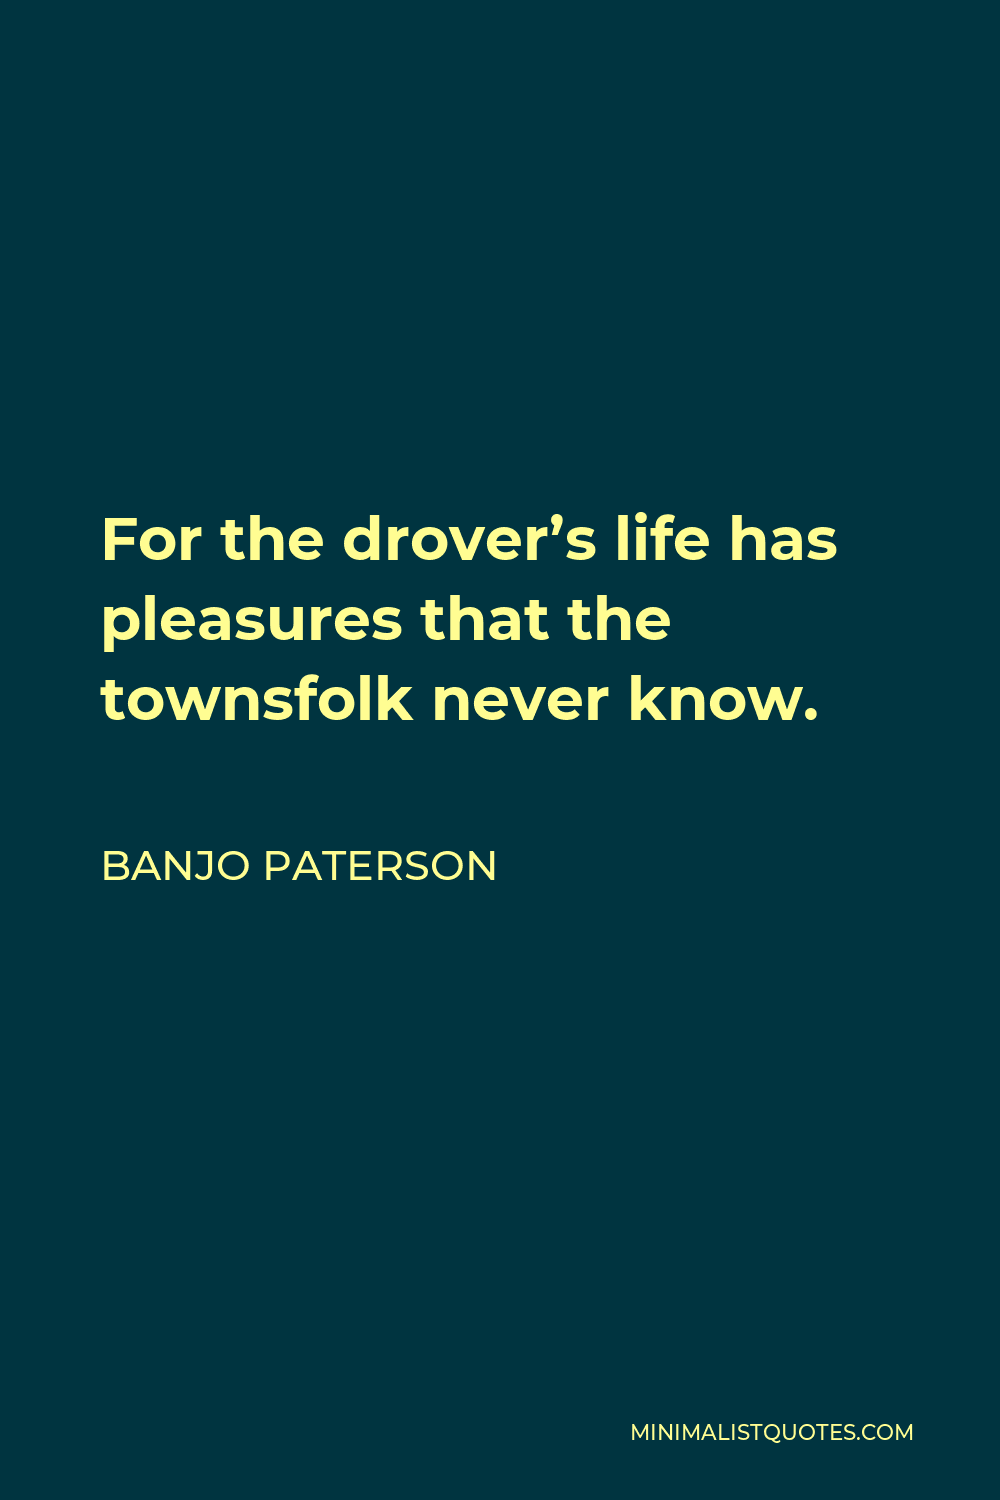 Banjo Paterson Quote - For the drover’s life has pleasures that the townsfolk never know.